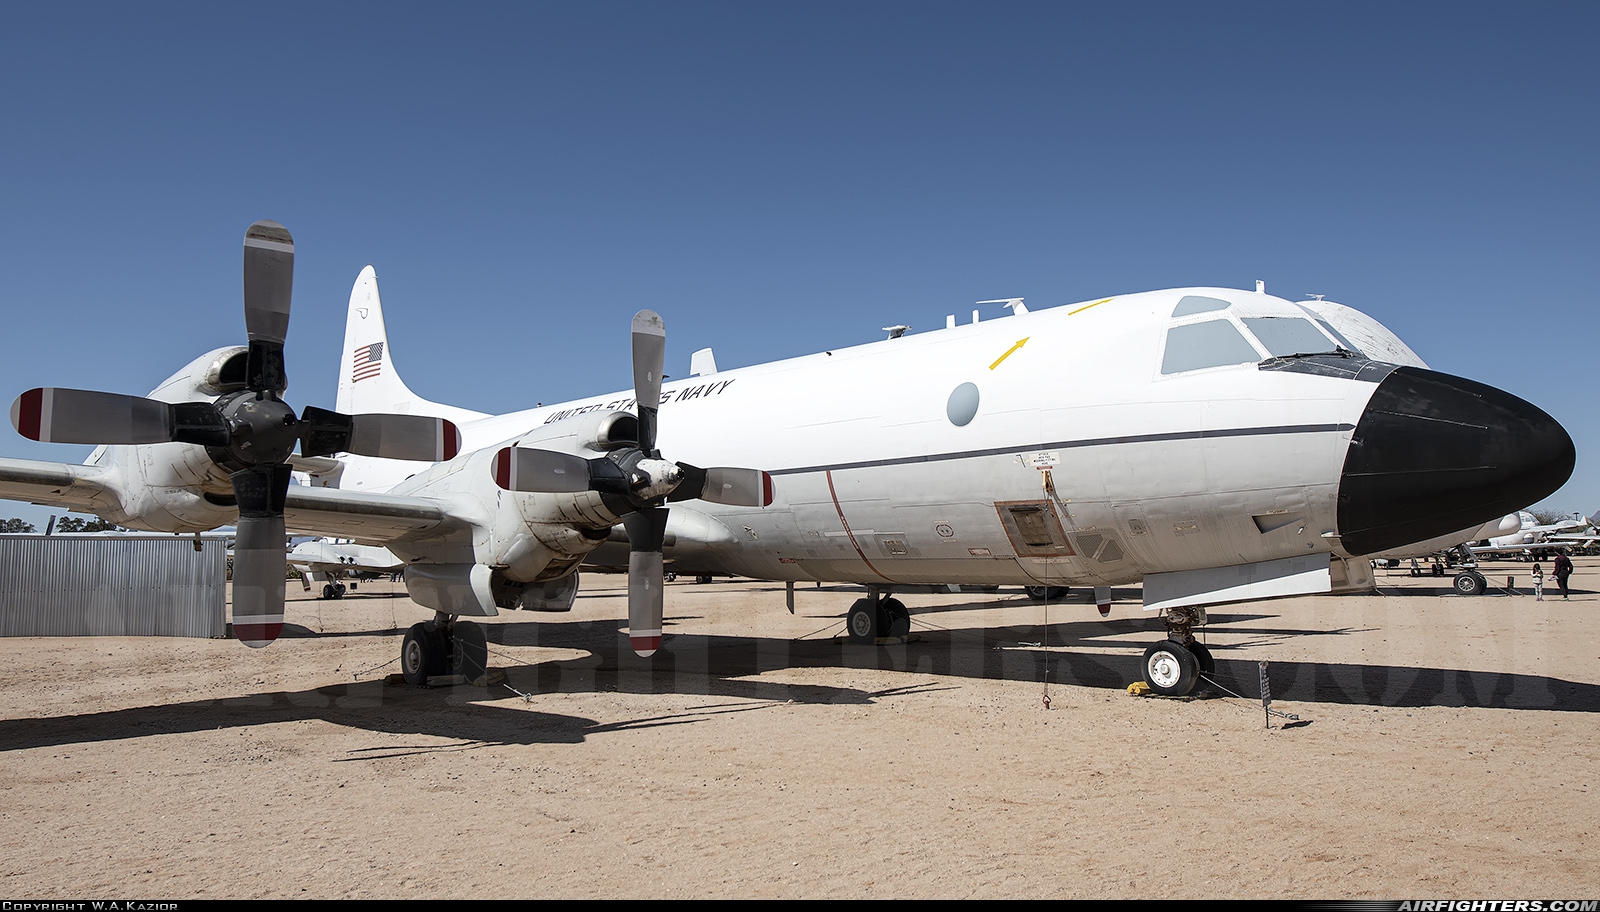 USA - Navy Lockheed VP-3A Orion 150511 at Tucson - Pima Air and Space Museum, USA